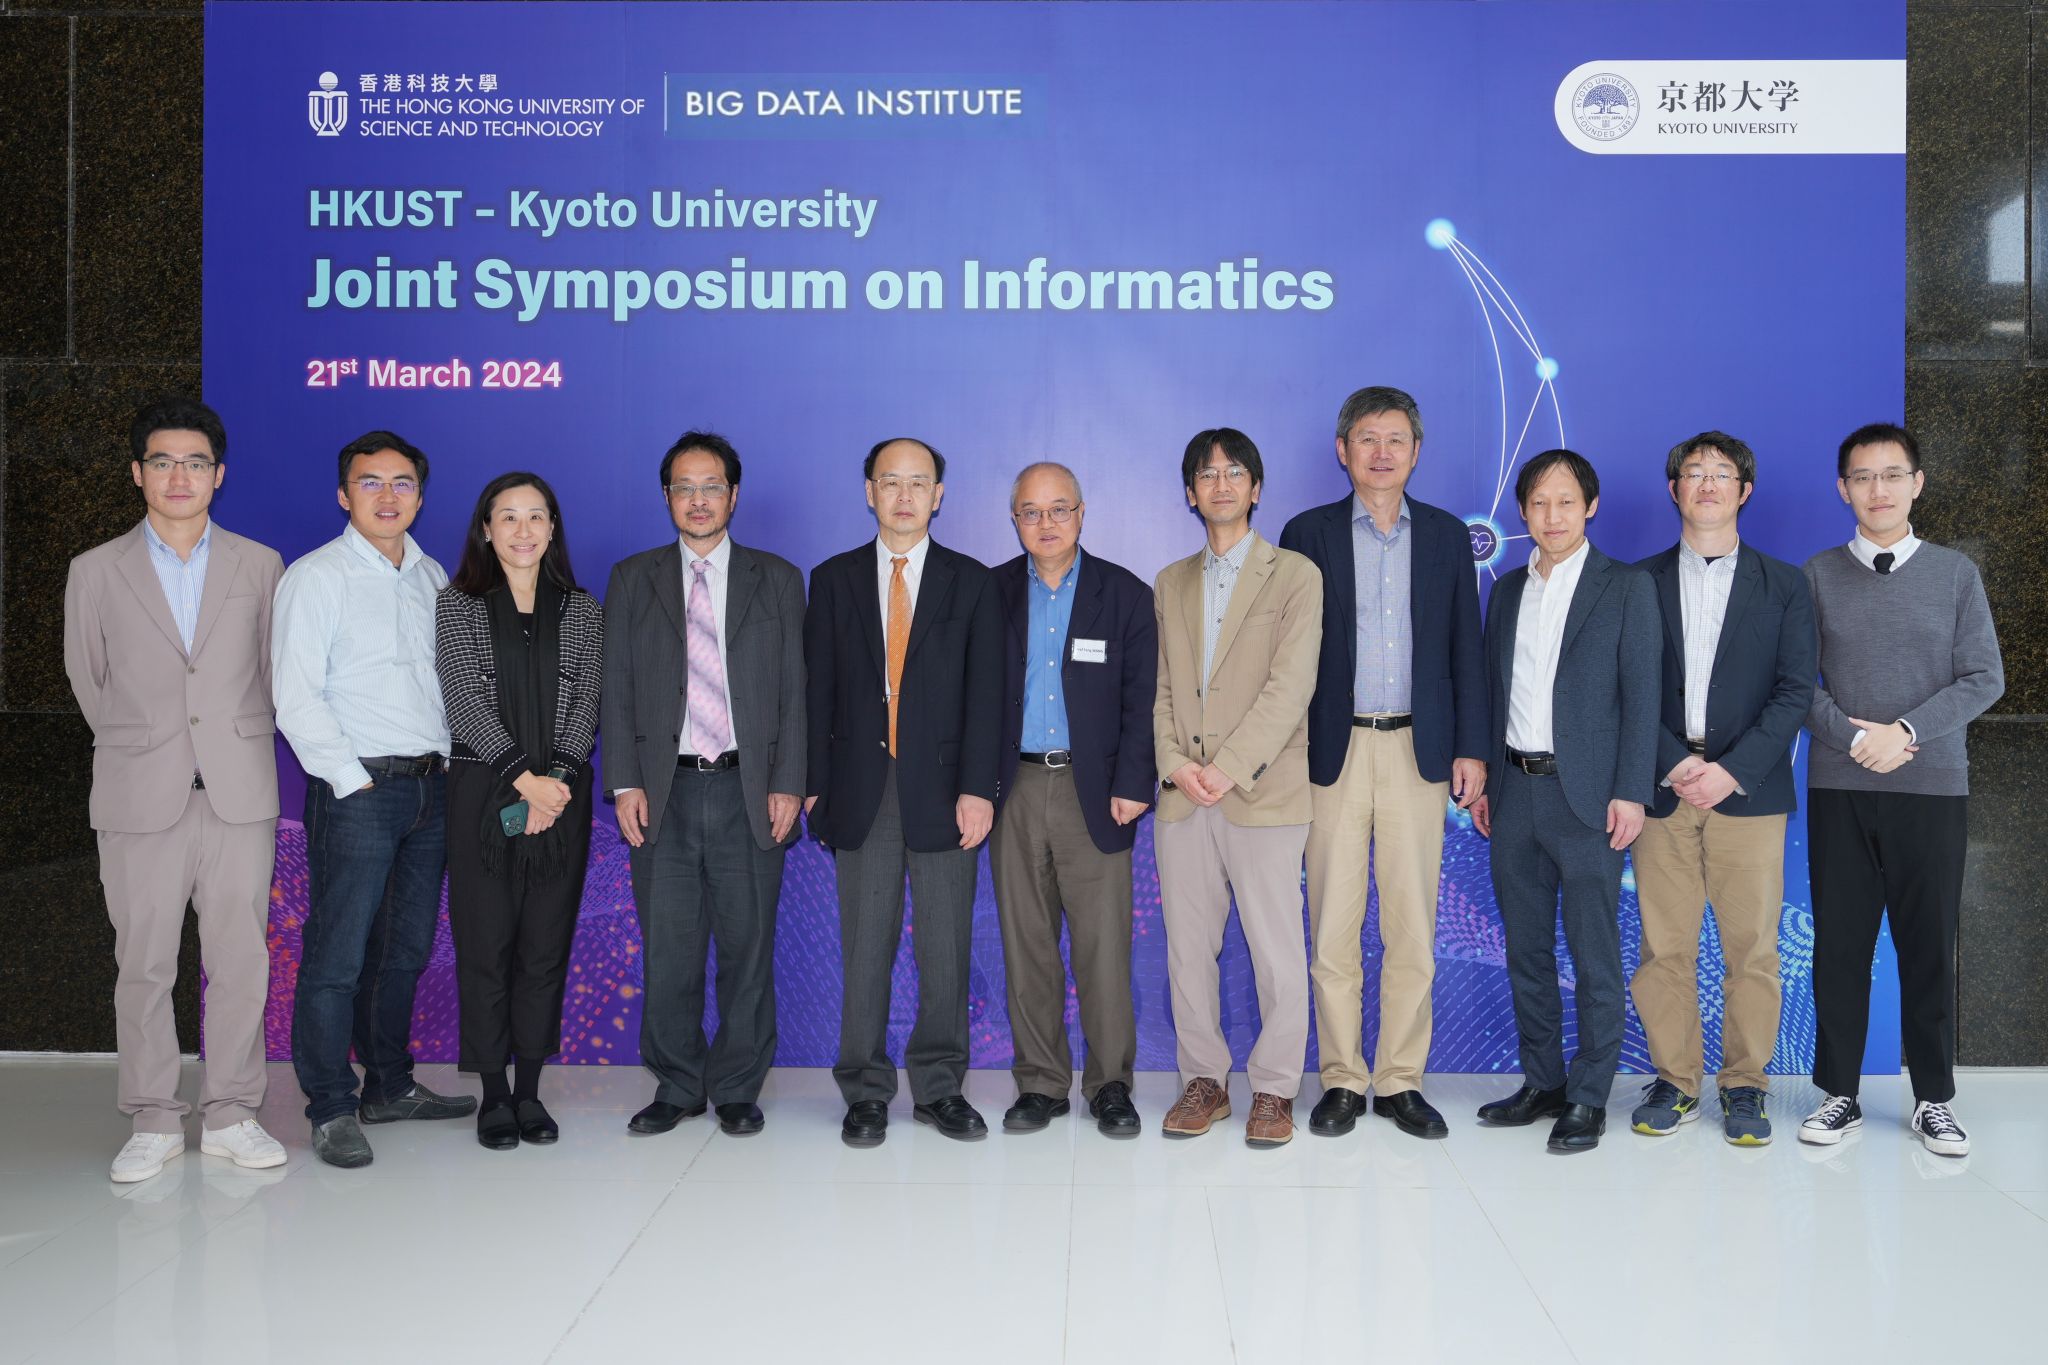 The HKUST Big Data Institute hosted the HKUST and Kyoto University Joint Symposium on Informatics on March 21.